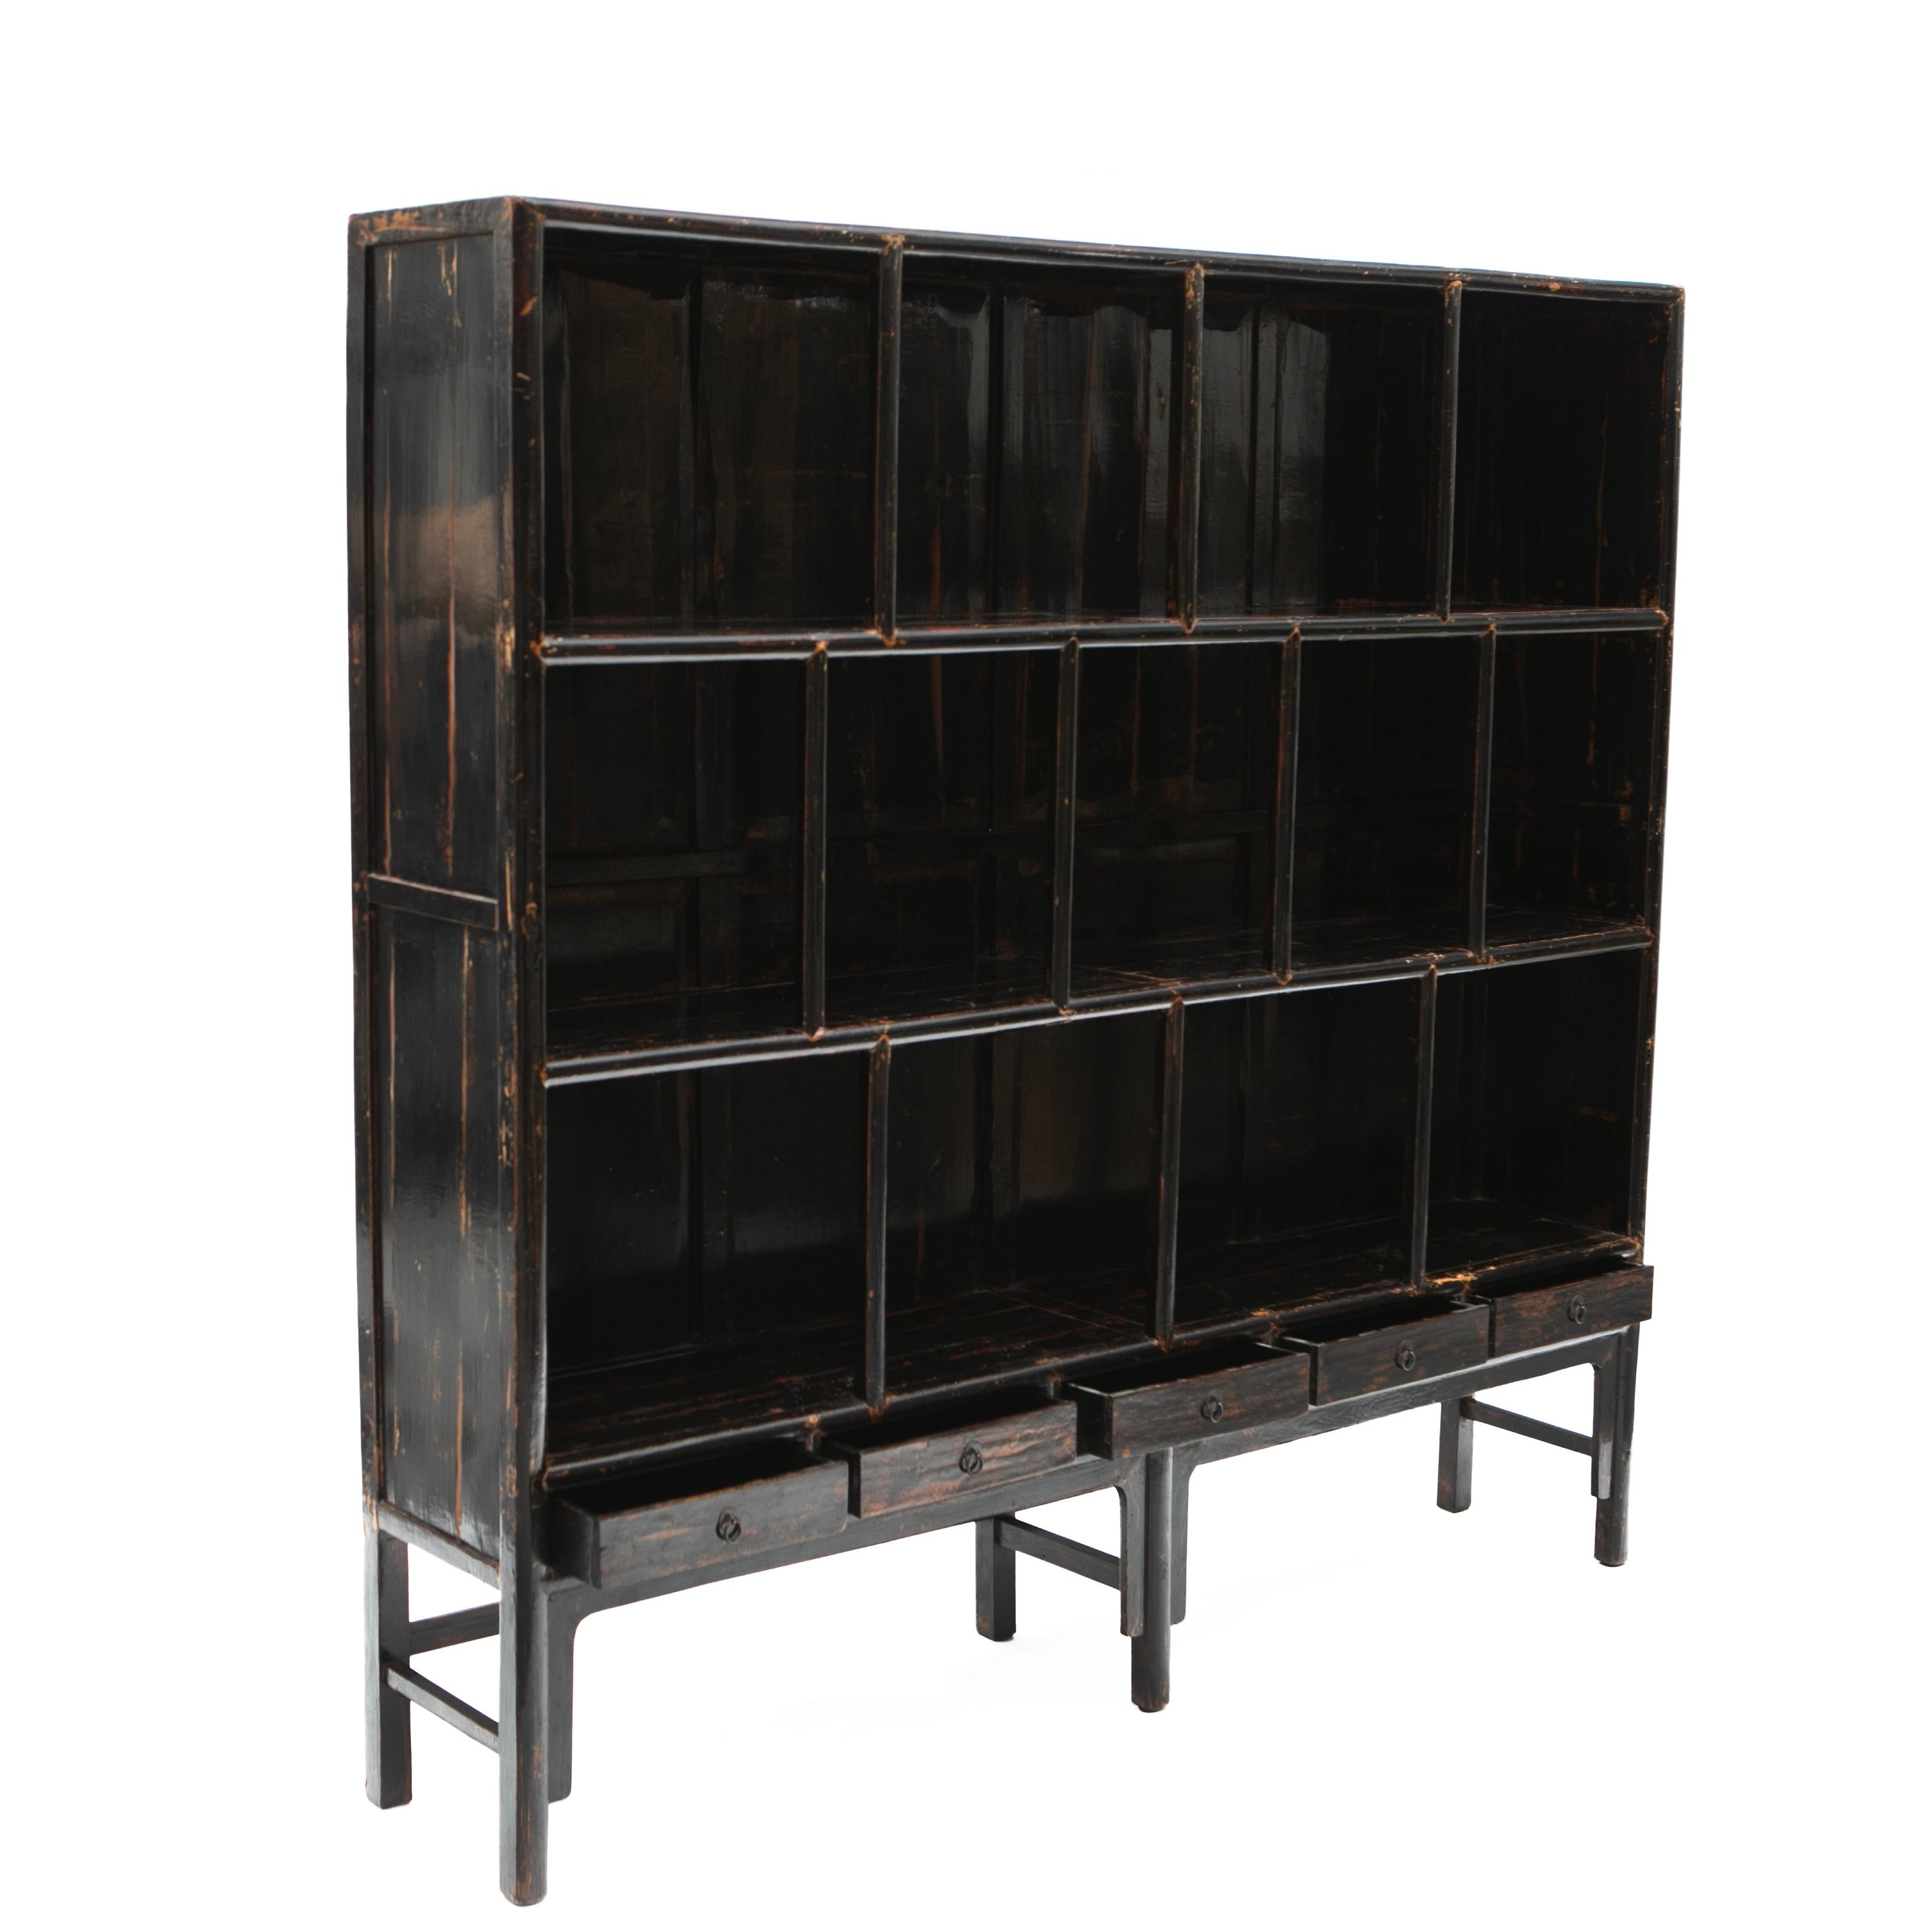 Large bookcase with original black lacquer, showcasing a beautiful age-related patina, accentuated by a clear lacquer surface finish.
The bookcase features three shelves with 'lattice' fronts, originally used for storing paper rolls for calligraphy,